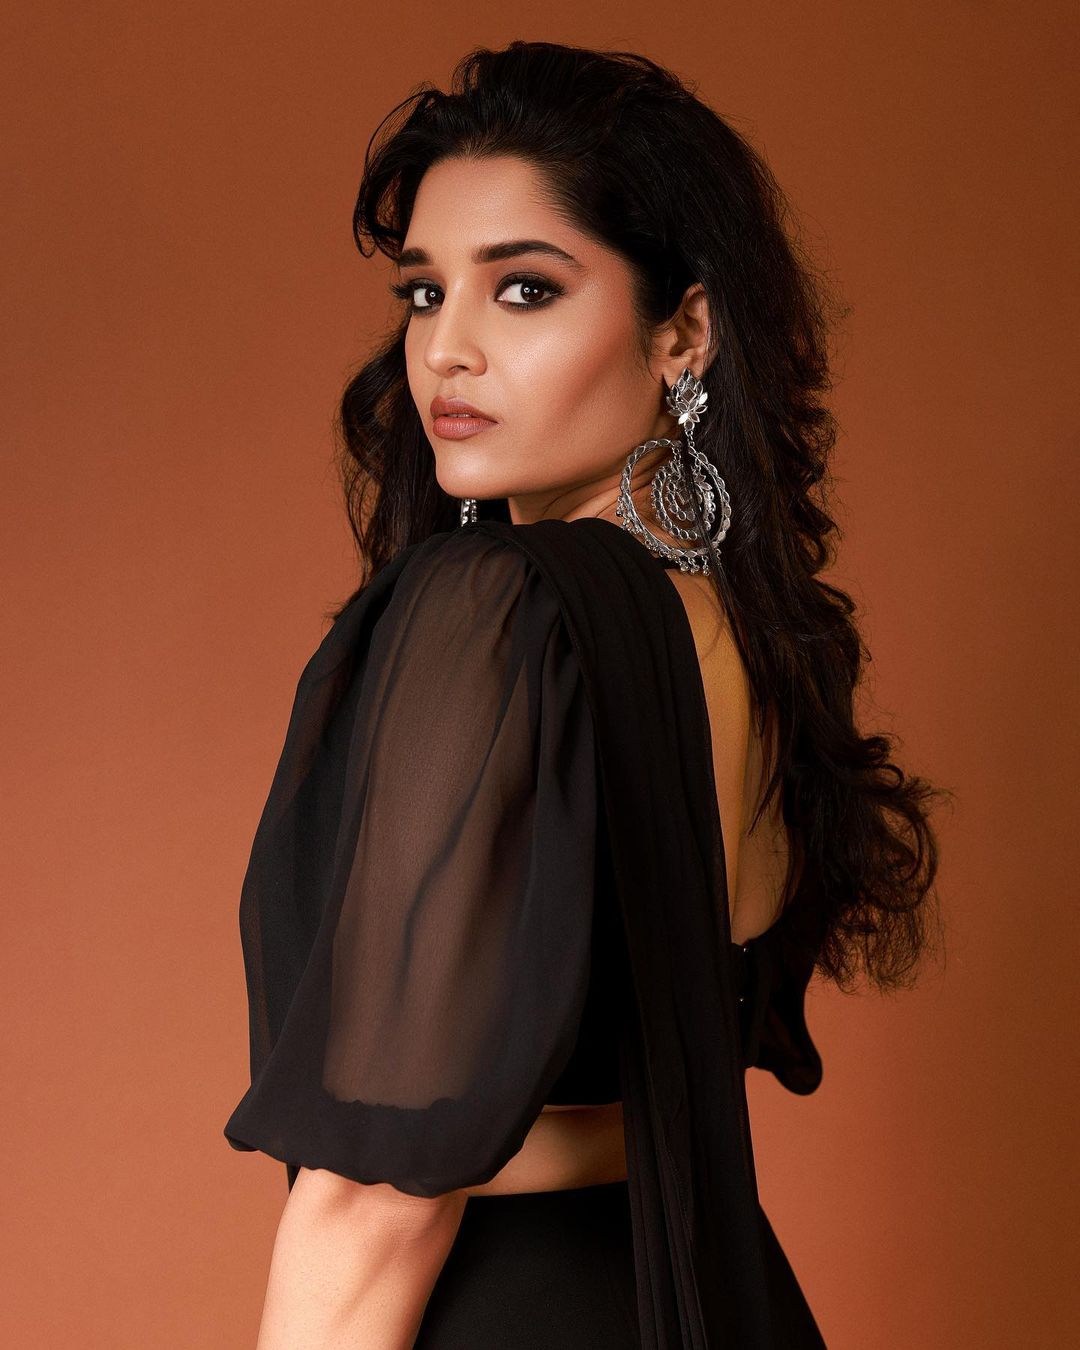 Ritika Singh's new pictures in an all-black getup